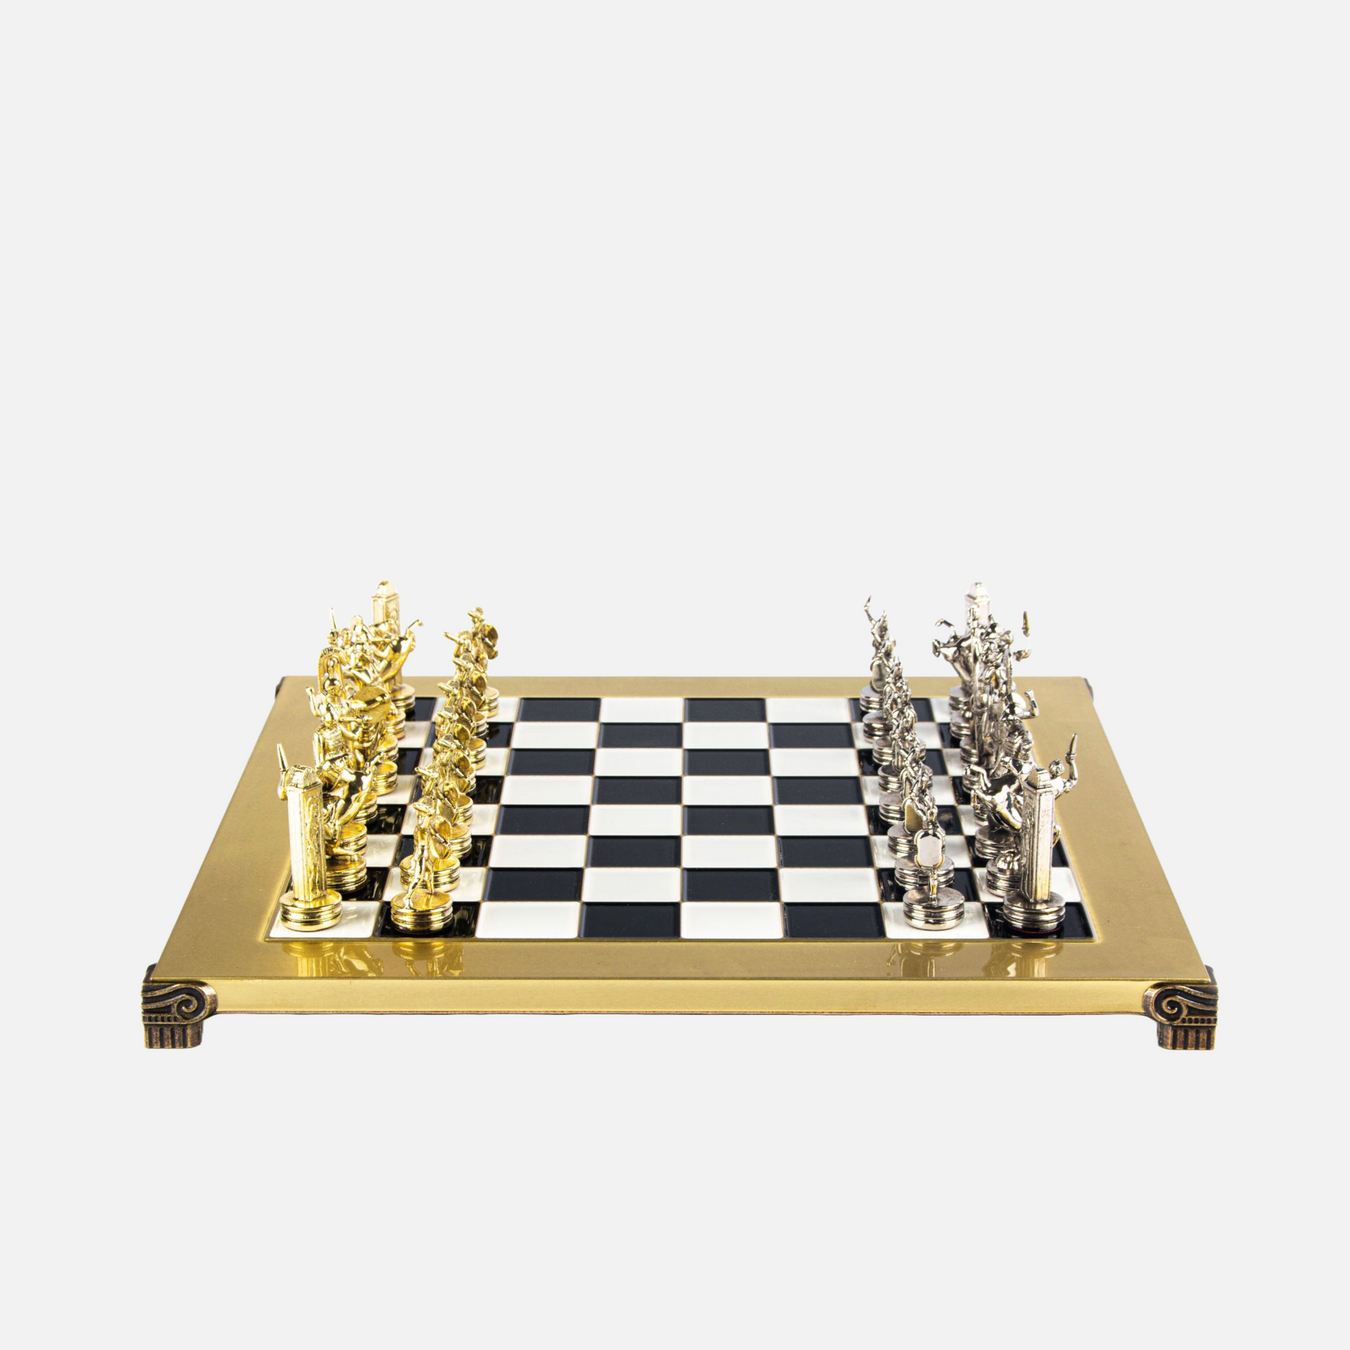 Unique Handmade Chess and Checkers